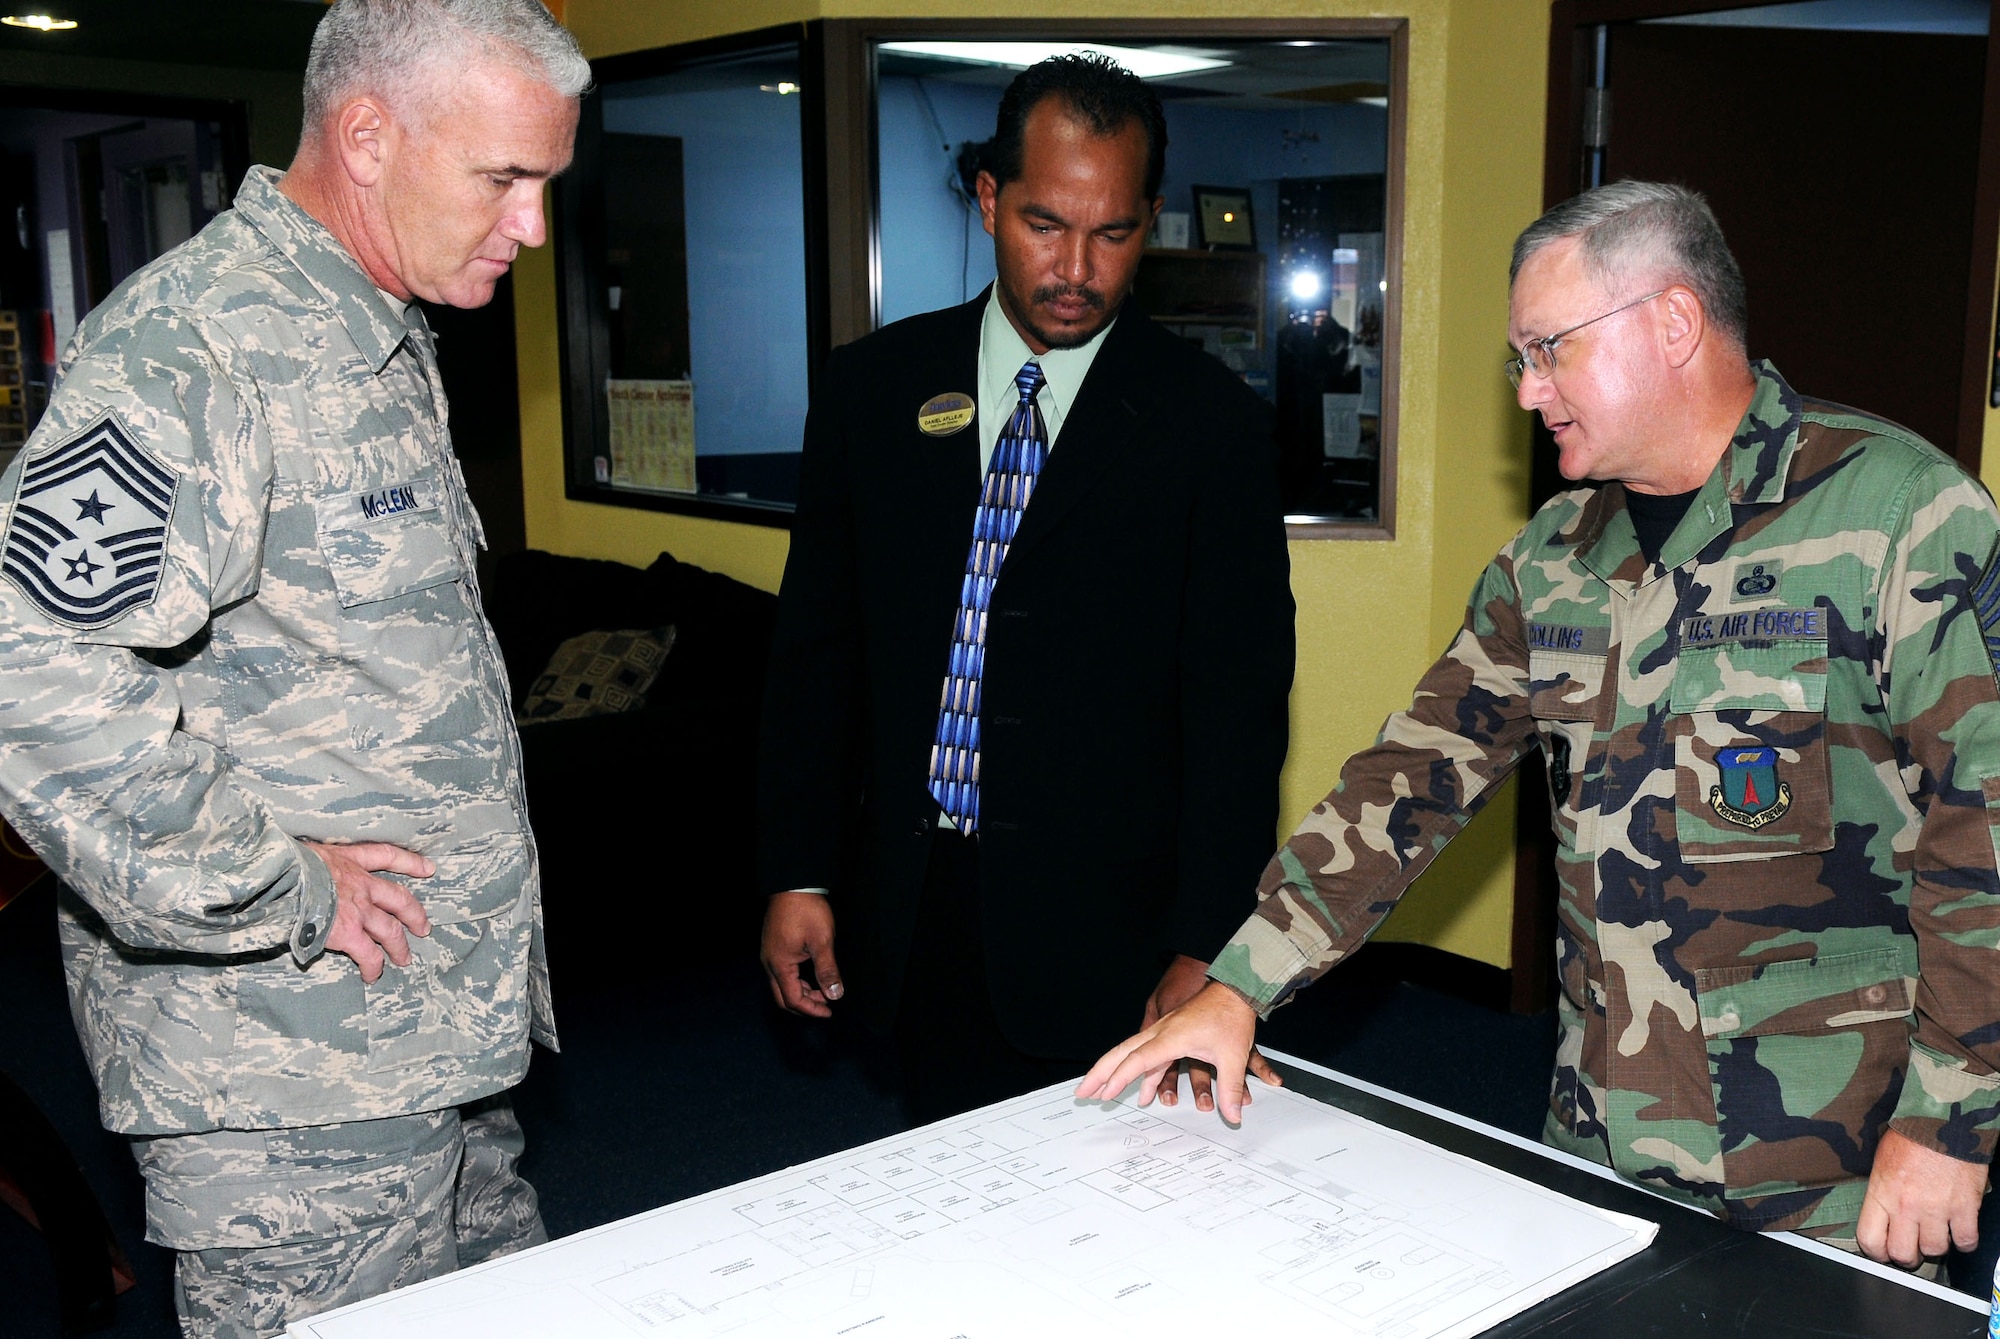 ANDERSEN AIR FORCE BASE, Guam - Pacific Air Forces Command Chief Master Sgt. Brooke McLean listens as Chief Master Sgt. Timothy Collins, 36th Mission Support Group superintendent, discusses future renovation plans for the Youth Center during a site visit here on November 10. This is Chief McLean's first visit to Andersen since being named command chief of PACAF. (U.S. photo by Airman 1st Class Julian North)